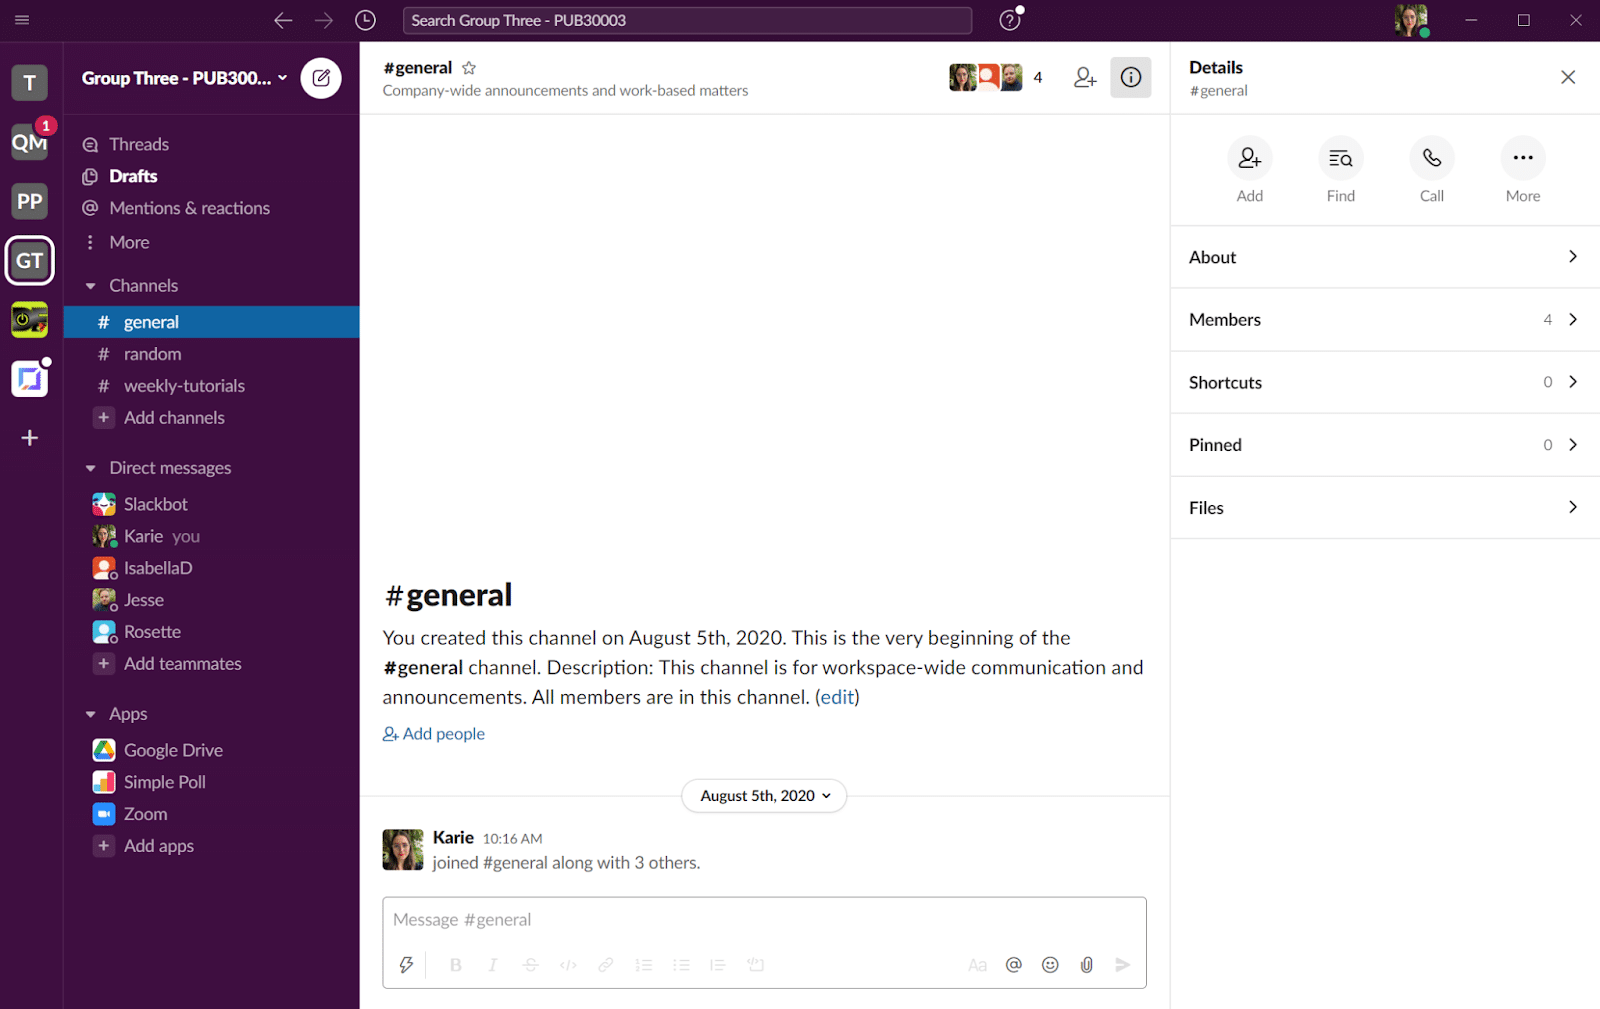 A screenshot showing Slack's interface with the right-hand 